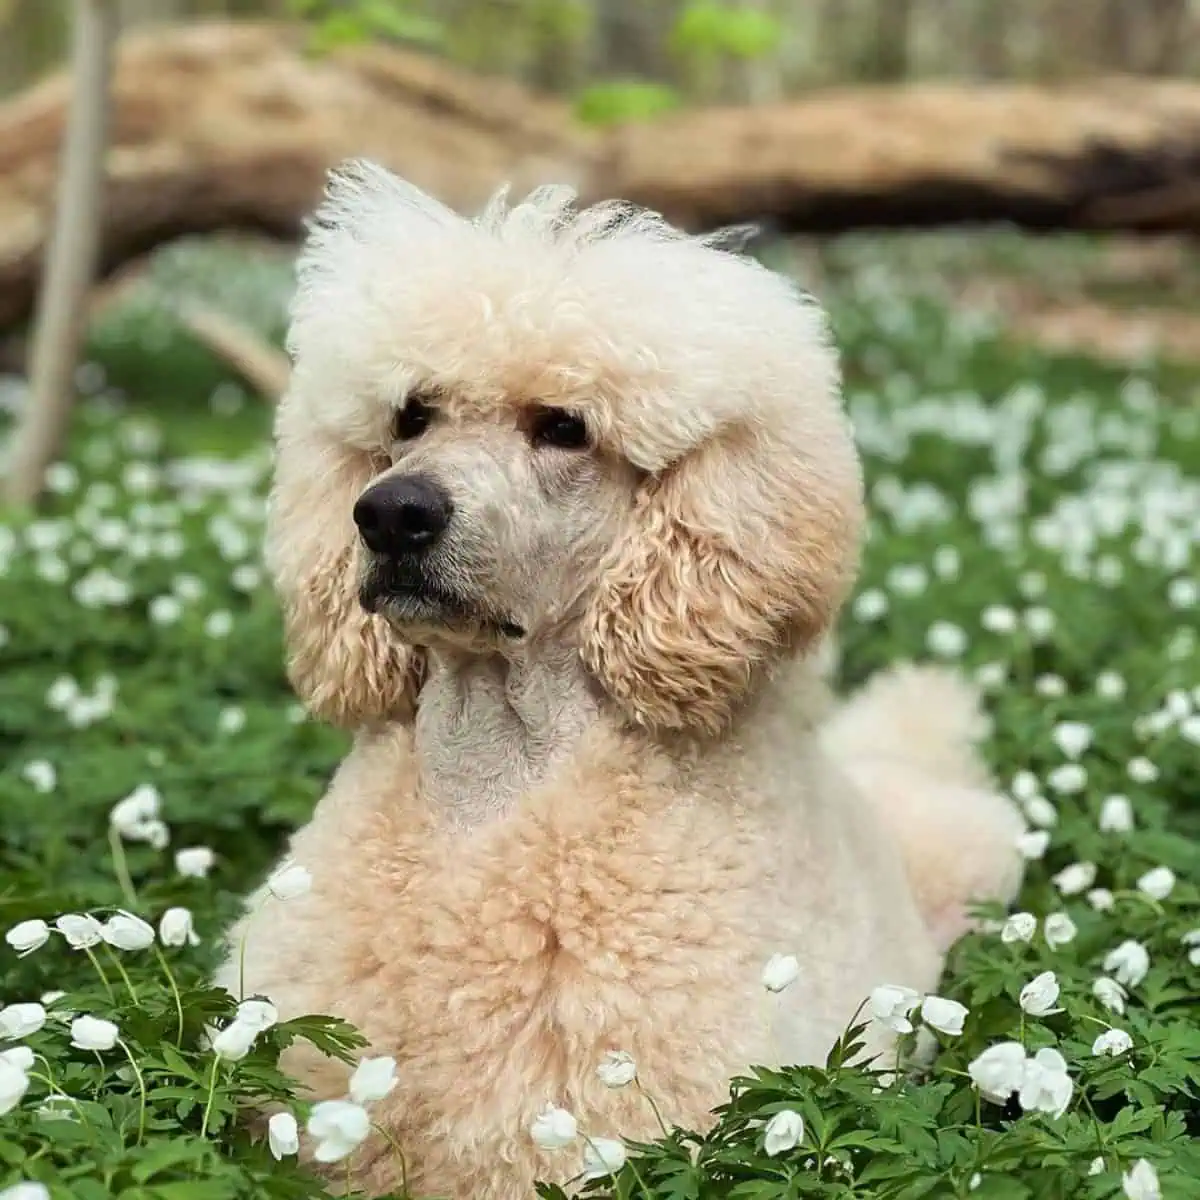 Poodle sits on bed of flowers